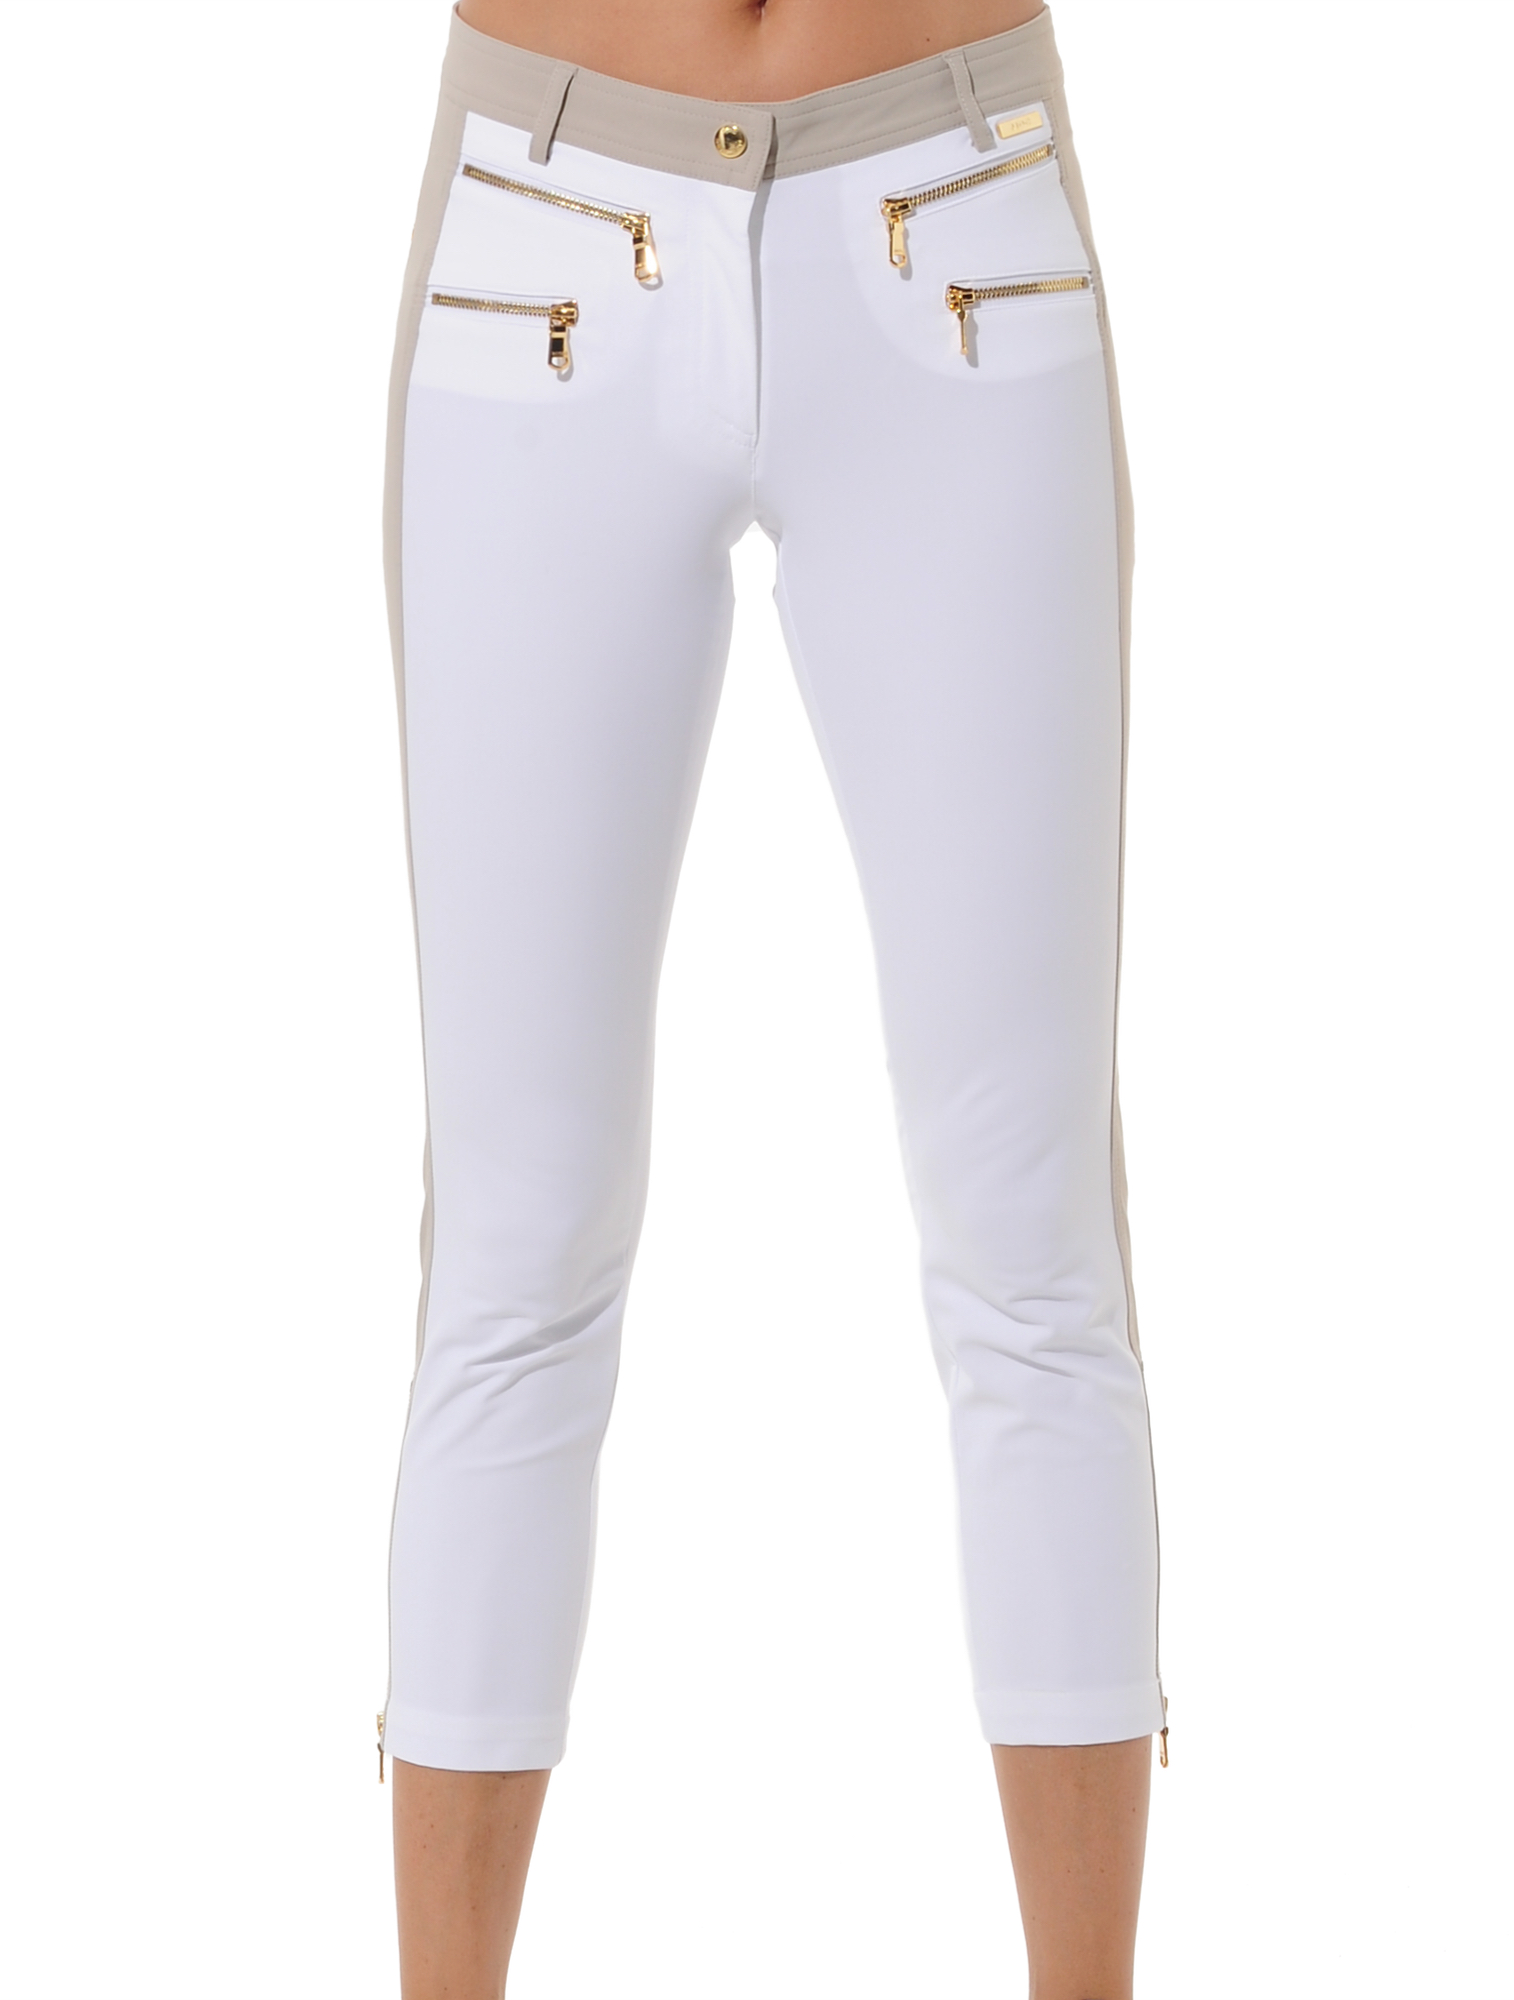 4way Stretch Shiny Gold Double Zip Cropped Pants white/light taupe